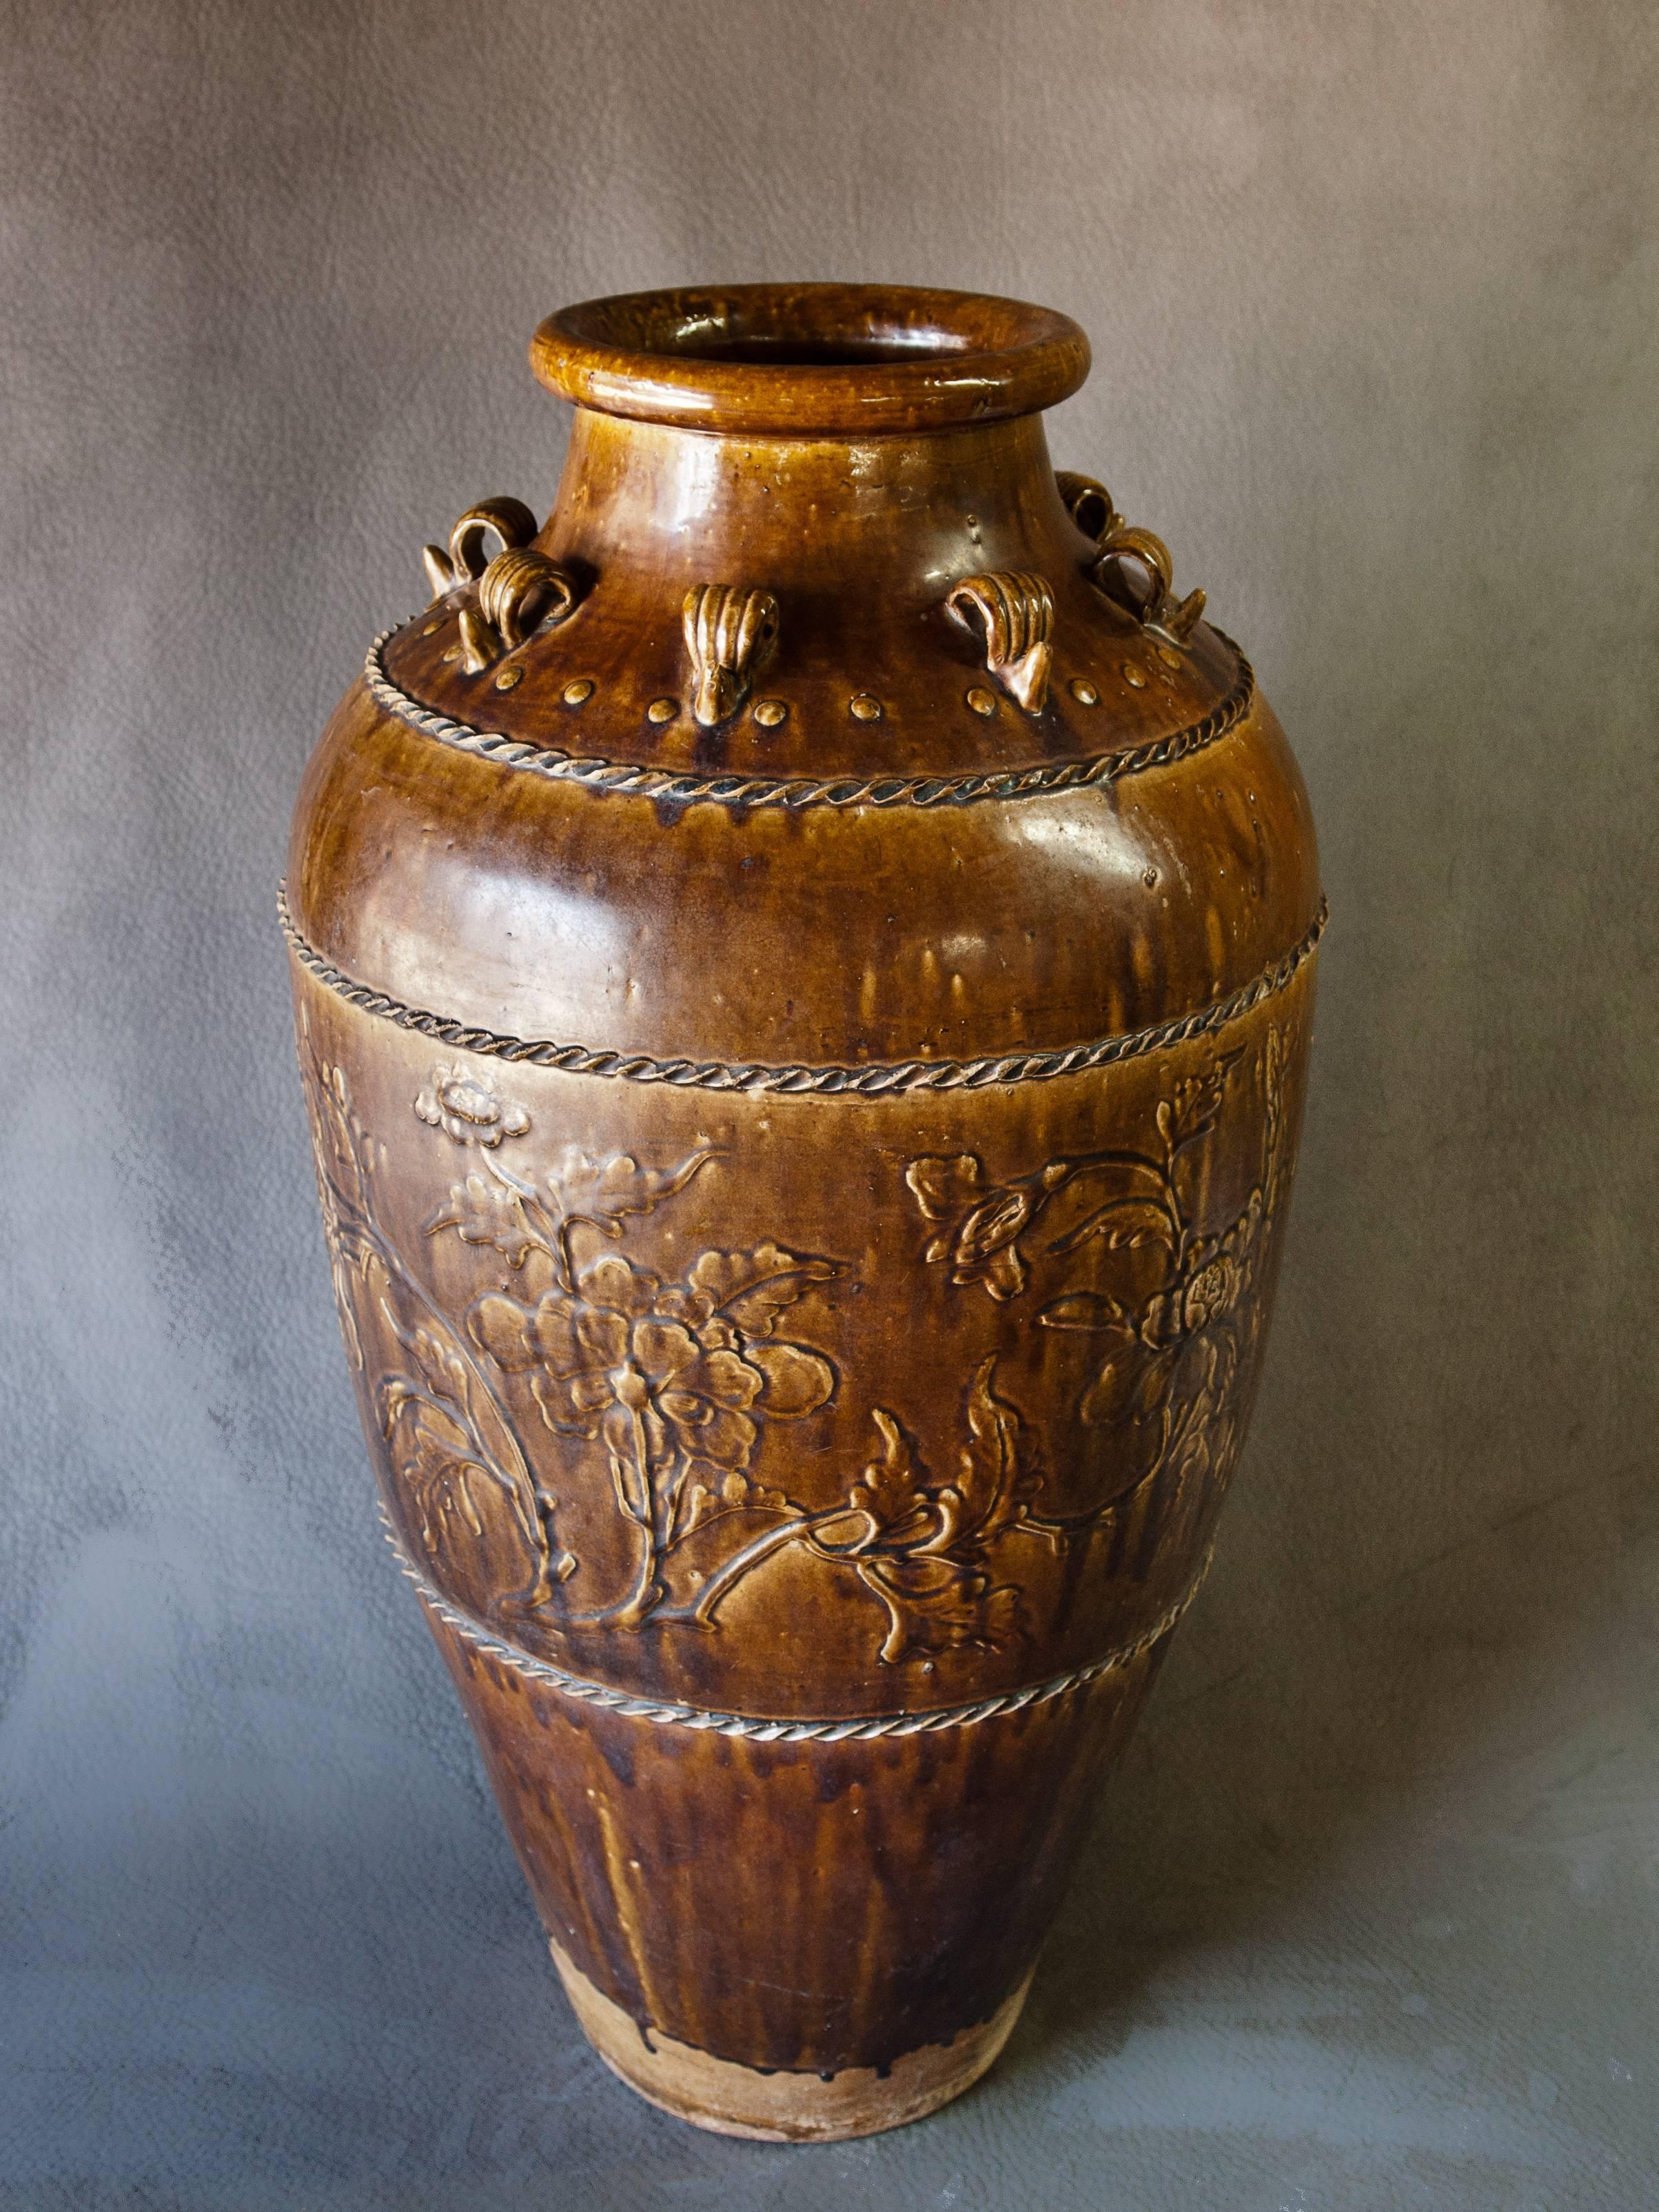 Tall Ming Dynasty Storage Jar. Martaban Ware. Found in Laos. Floral Design.
Tall brown glazed storage jar found in Laos but manufactured in southern China most probably during the Ming Dynasty. The jar is in excellent condition with a floral design